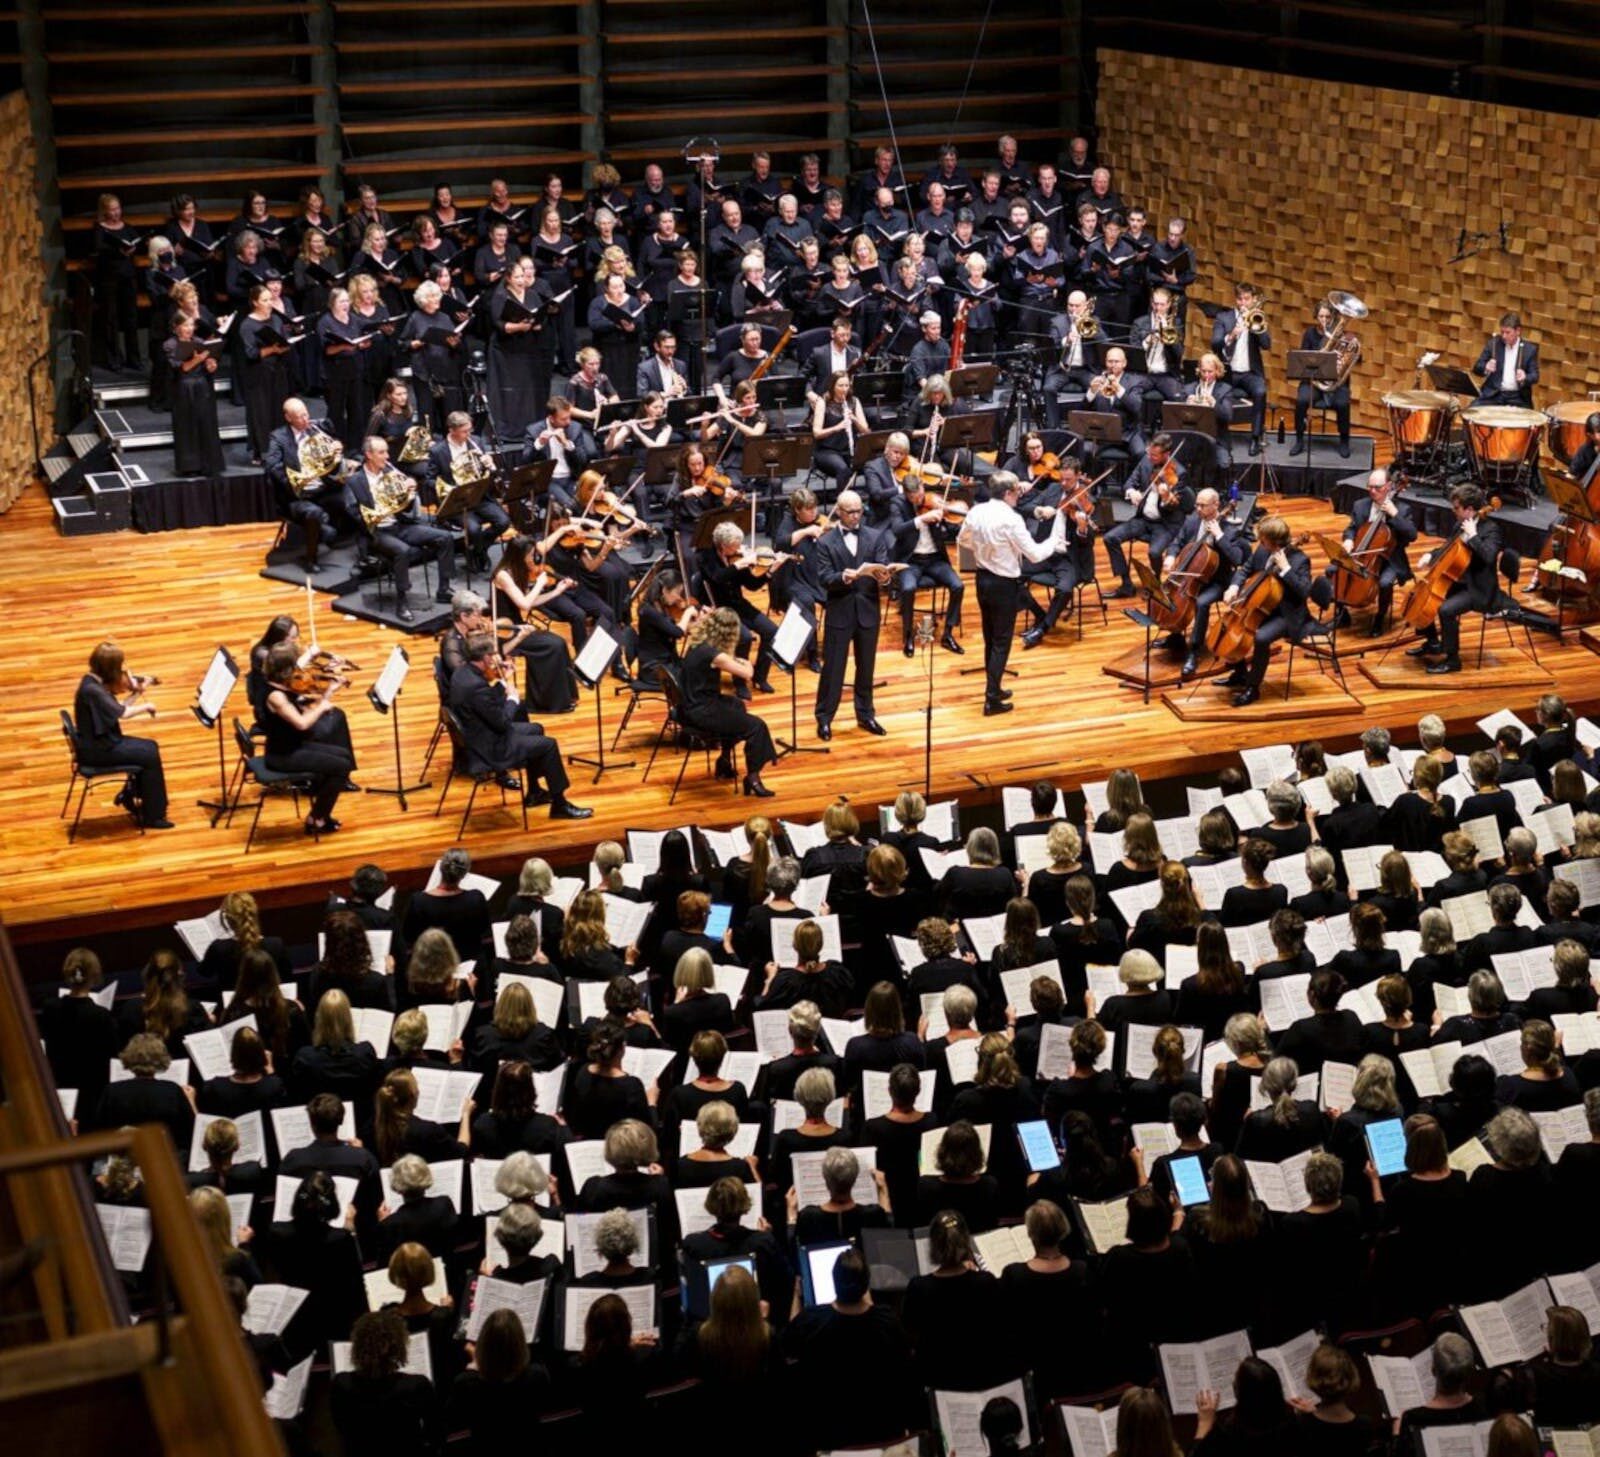 Photograph of a symphony orchestra. Choristers are situated behind and in front of them.